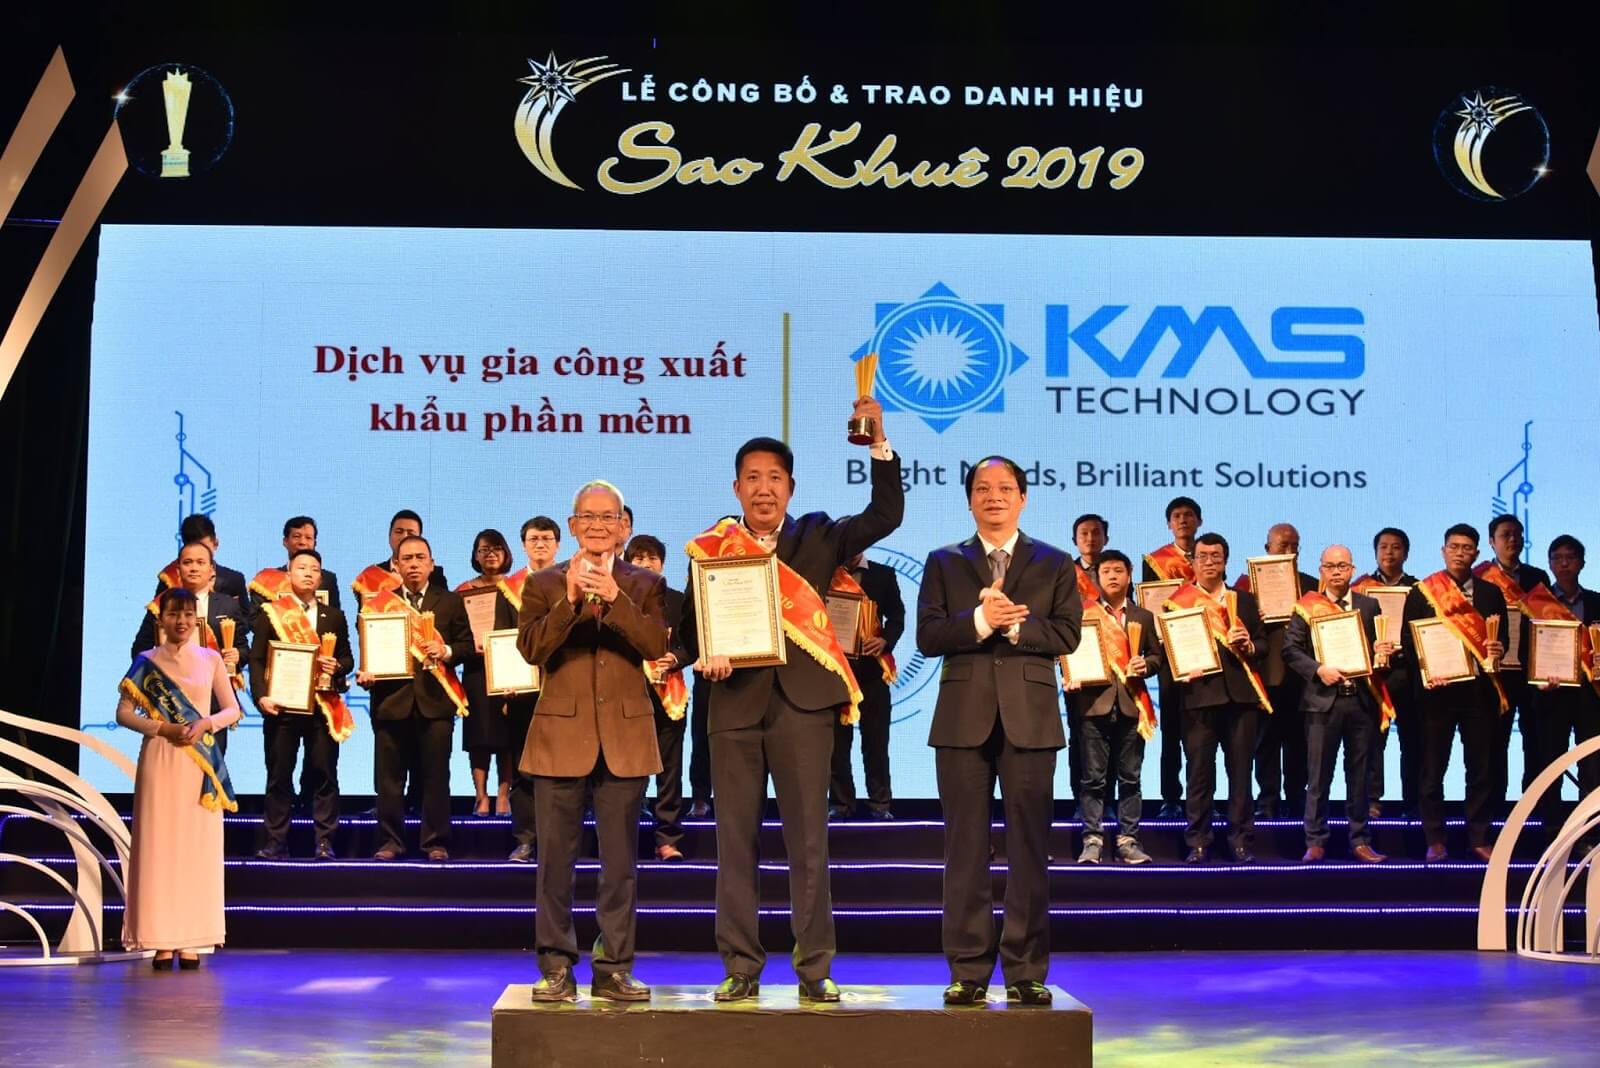 KMS Technology Receives Sao Khue Award 2019 for its Software Outsourcing Services for the Eighth Consecutive Year